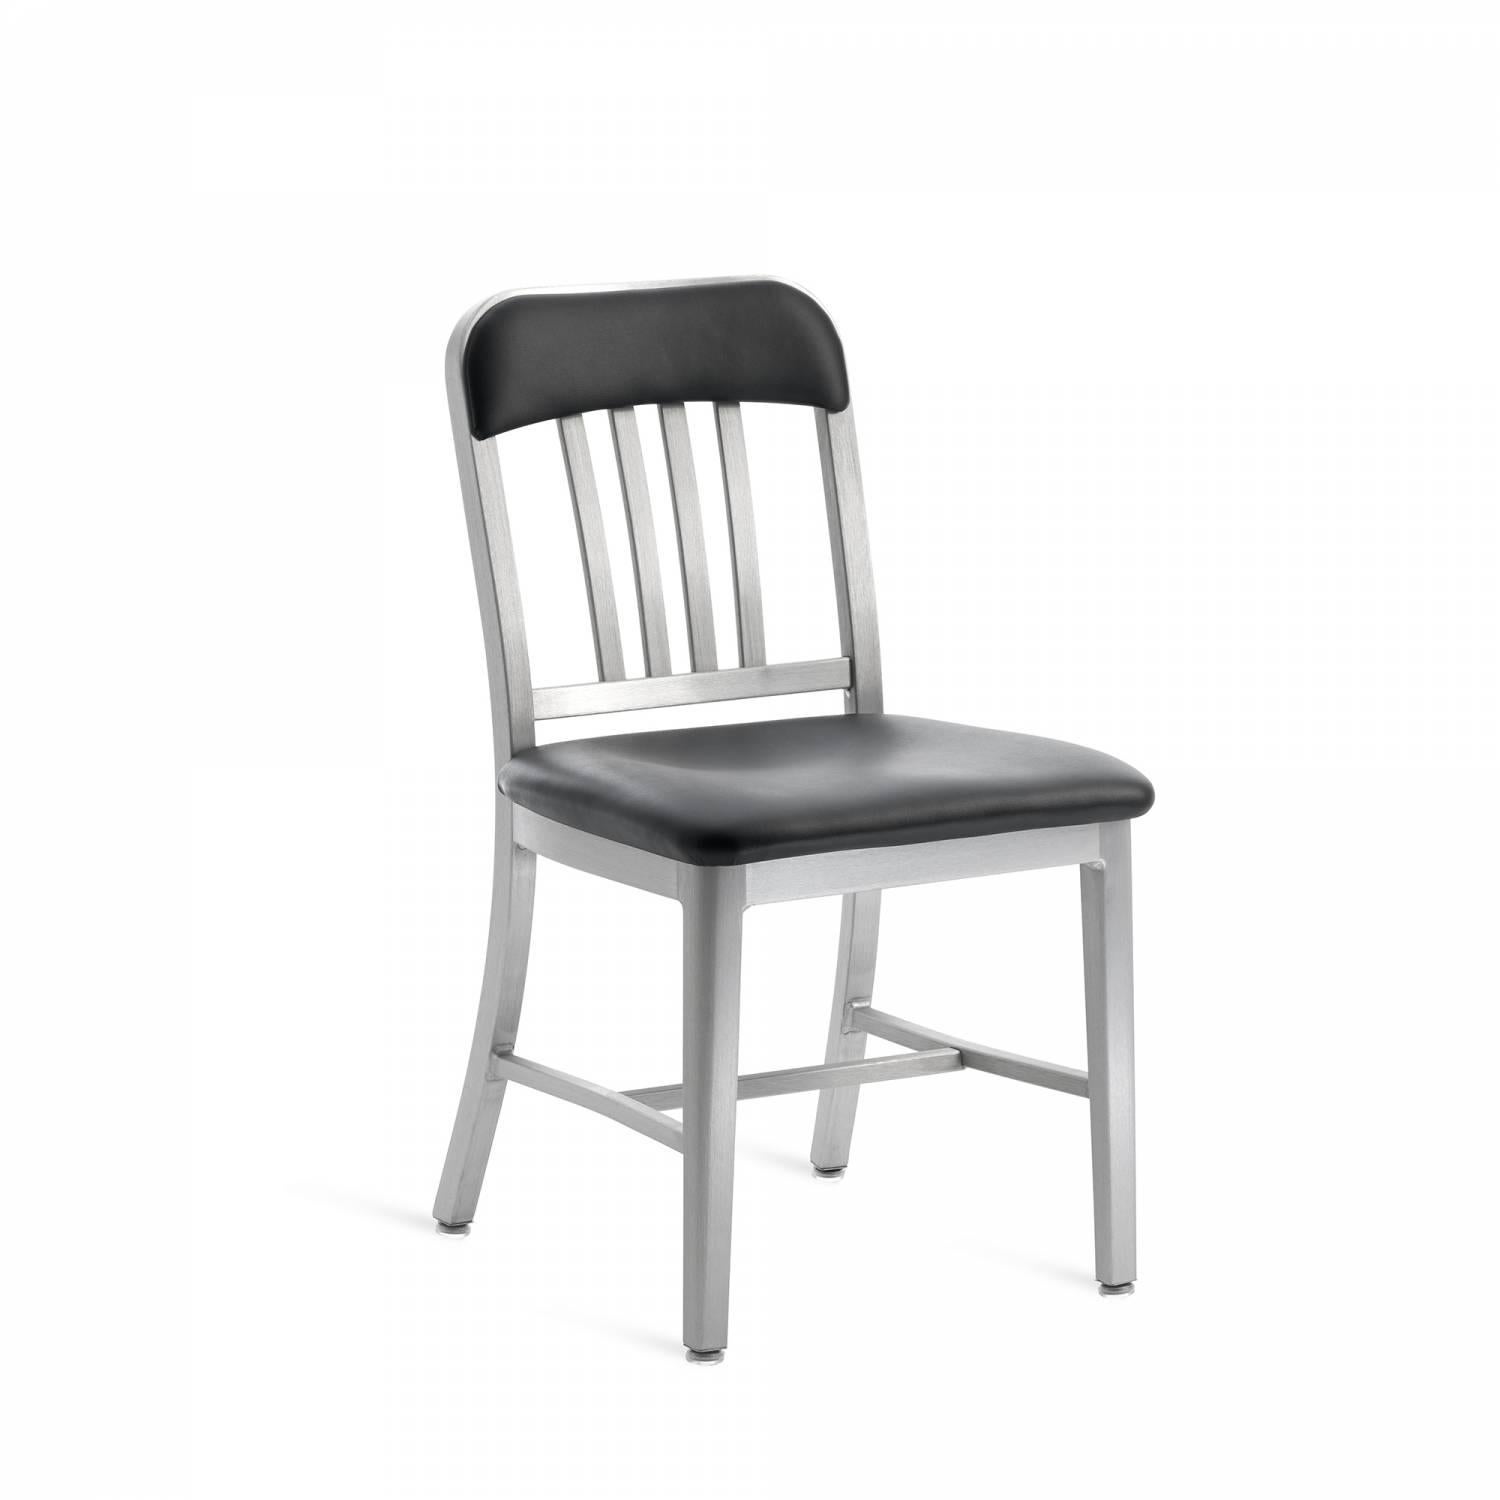 First built for use on submarines in 1944, the Navy chair has been in continuous Production ever since. With the famous 77 step Process, our craftsmen take soft, recycled aluminum, hand form and weld it- then temper it for strength. Finally, the